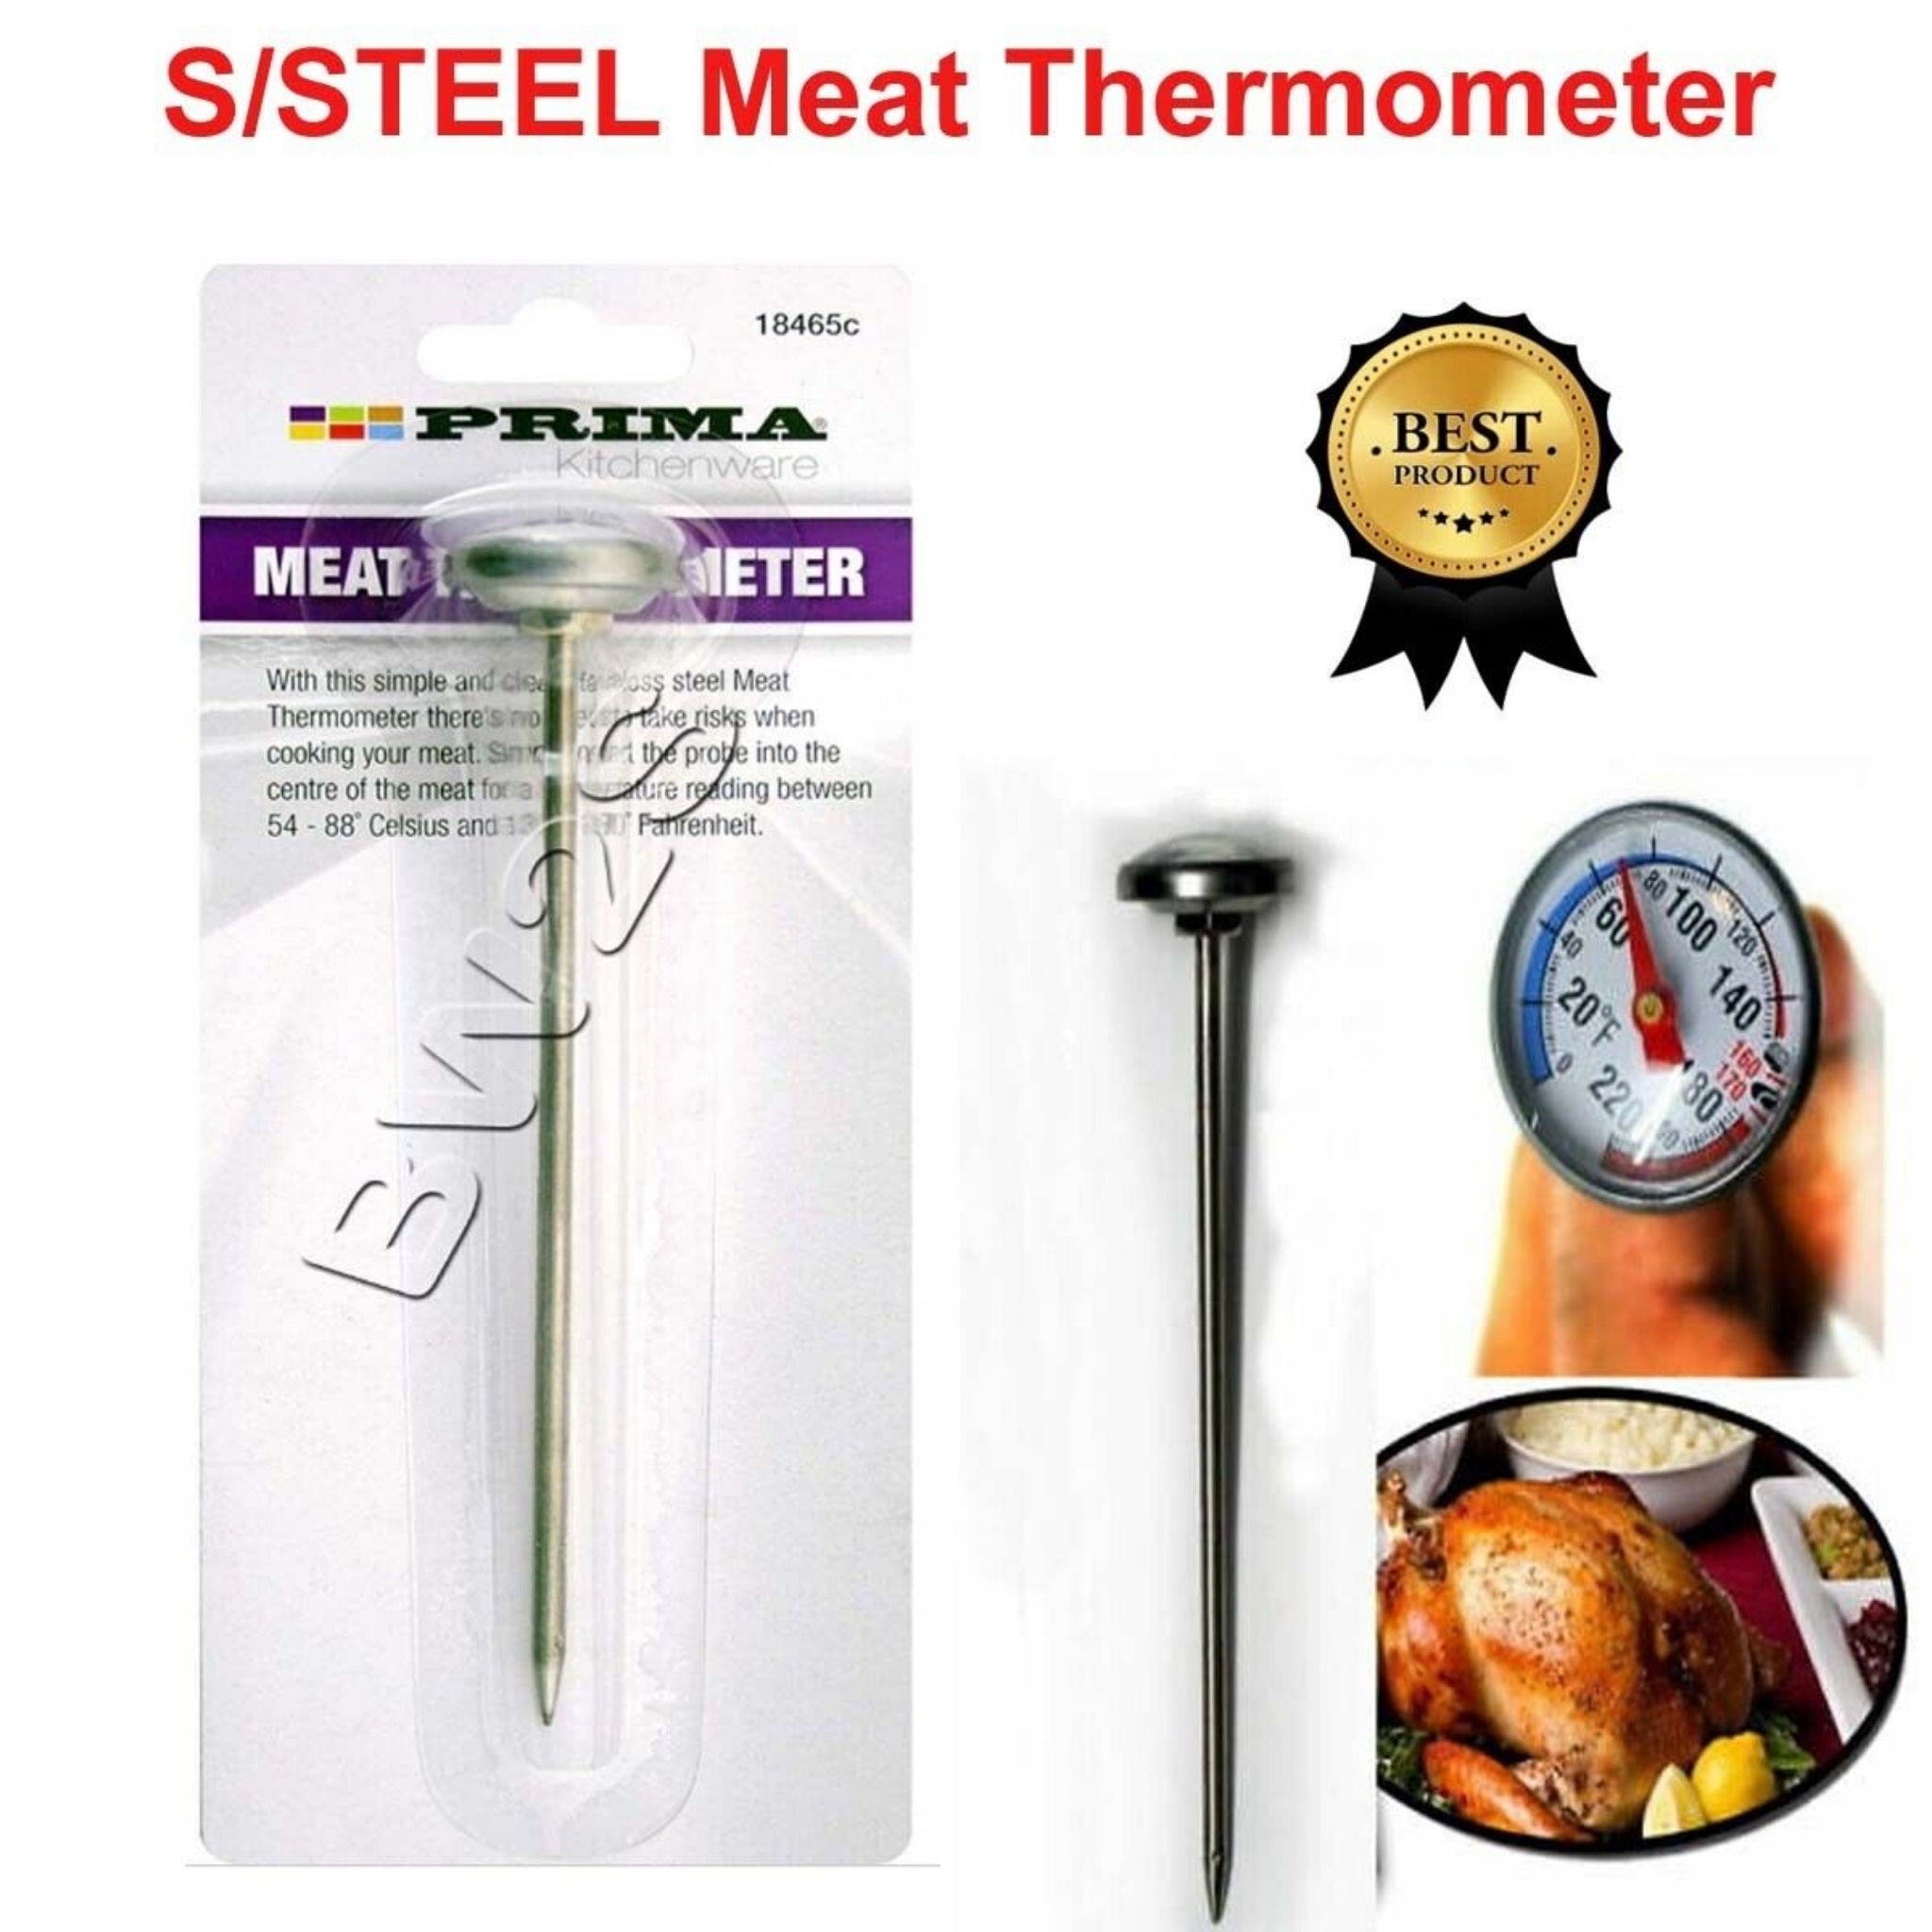 Mainstays Stainless Steel Meat Thermometer, Oven Thermometer with